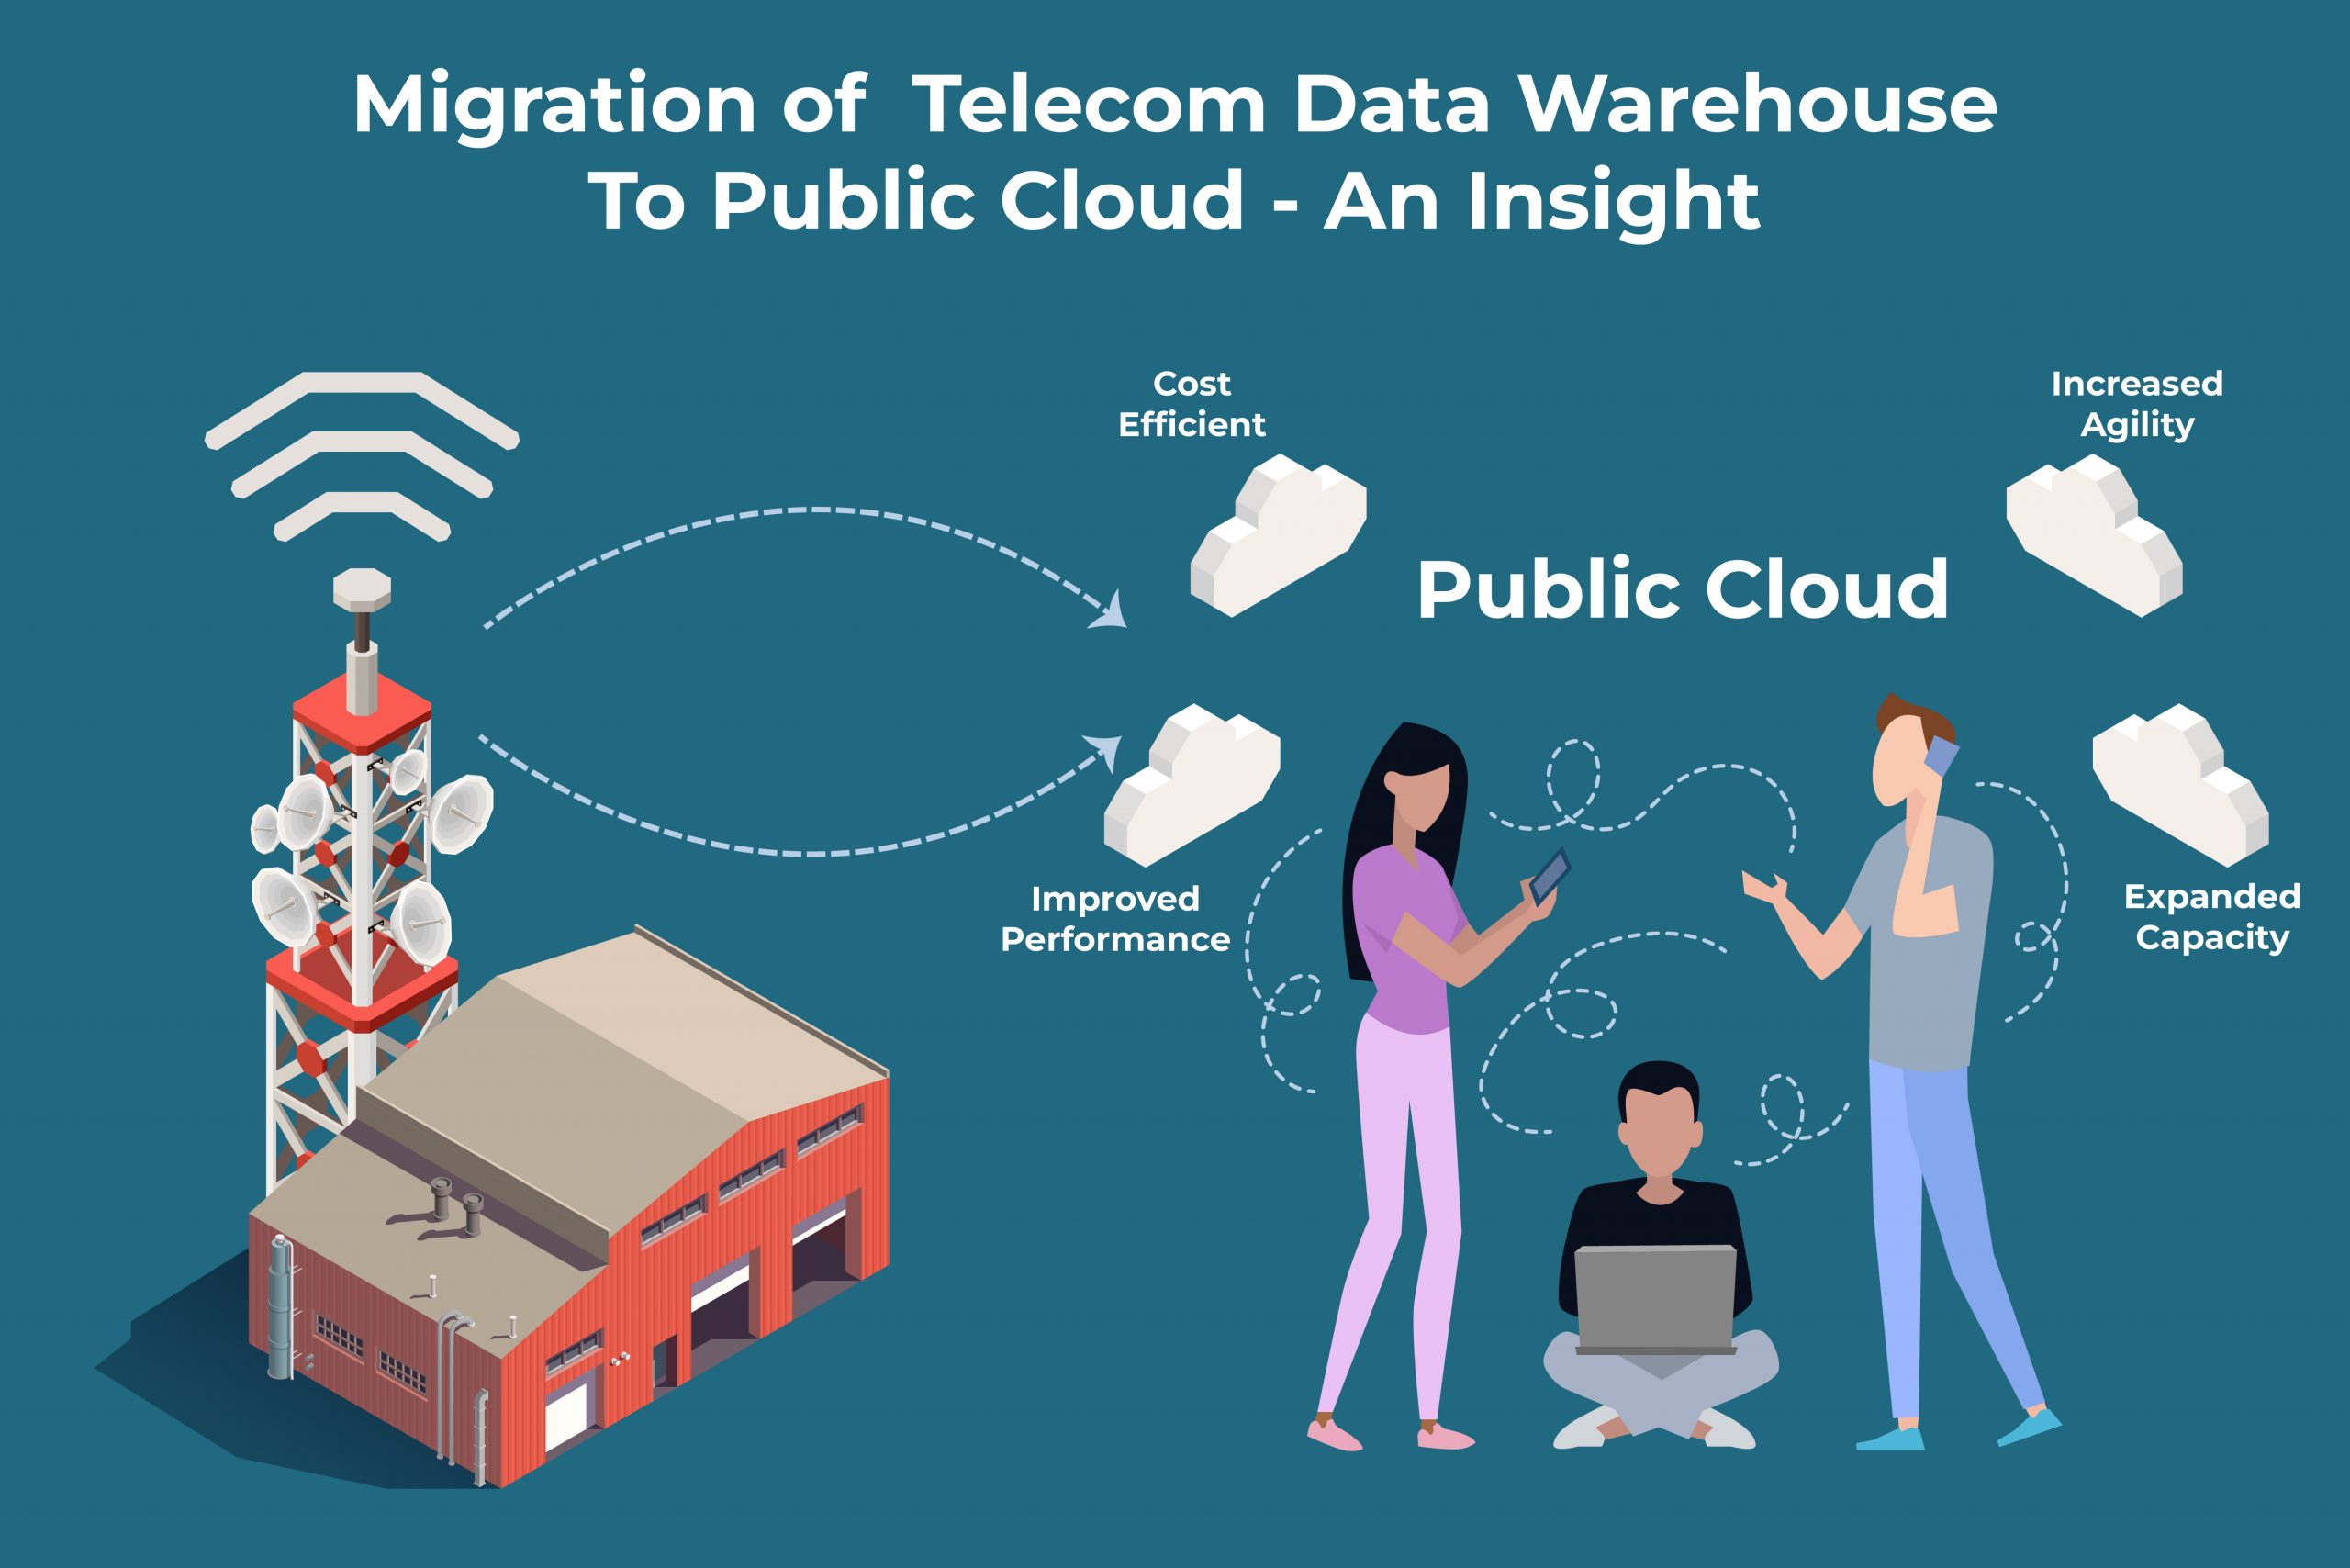 Migration of Telecom Data Warehouse to Public Cloud - An Insight